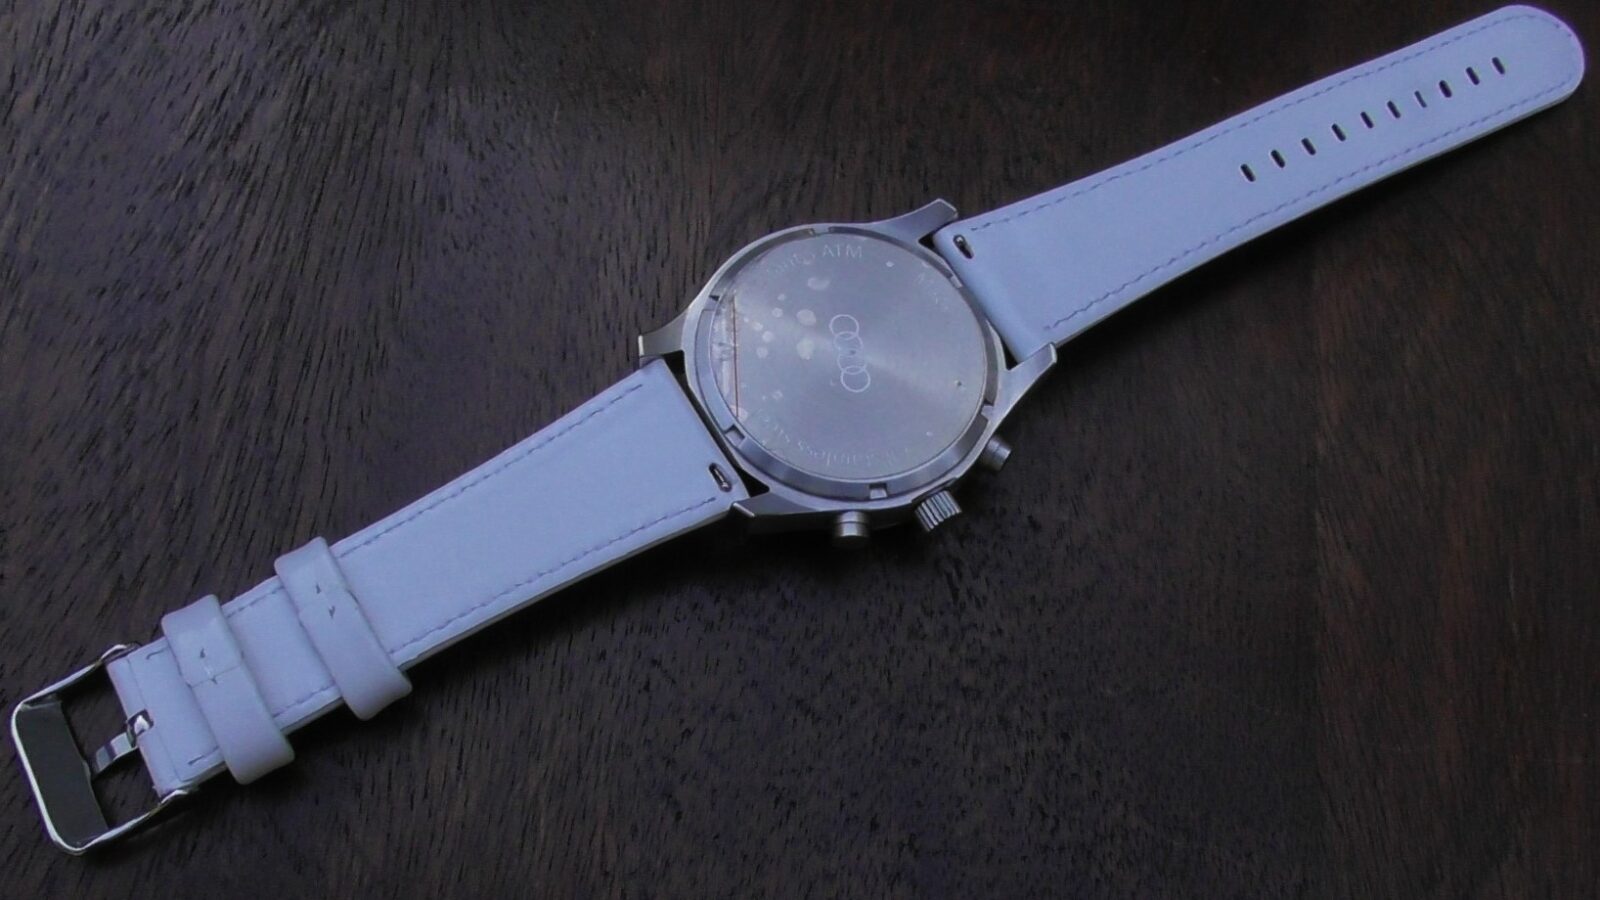 Marcool white leather quick release watch strap